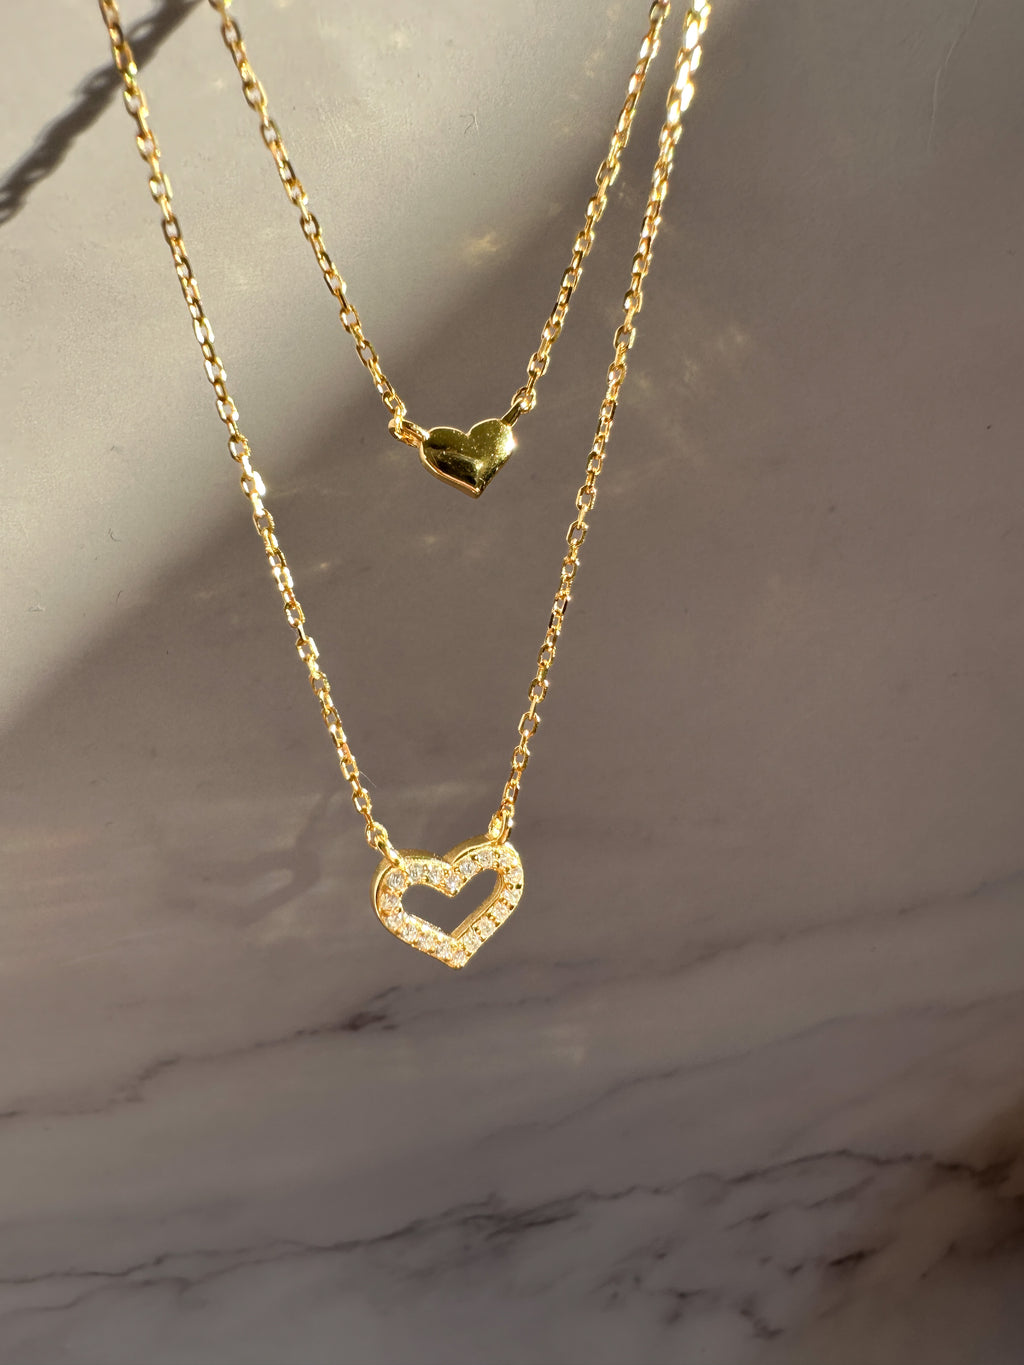 Double Love Crystal Necklace